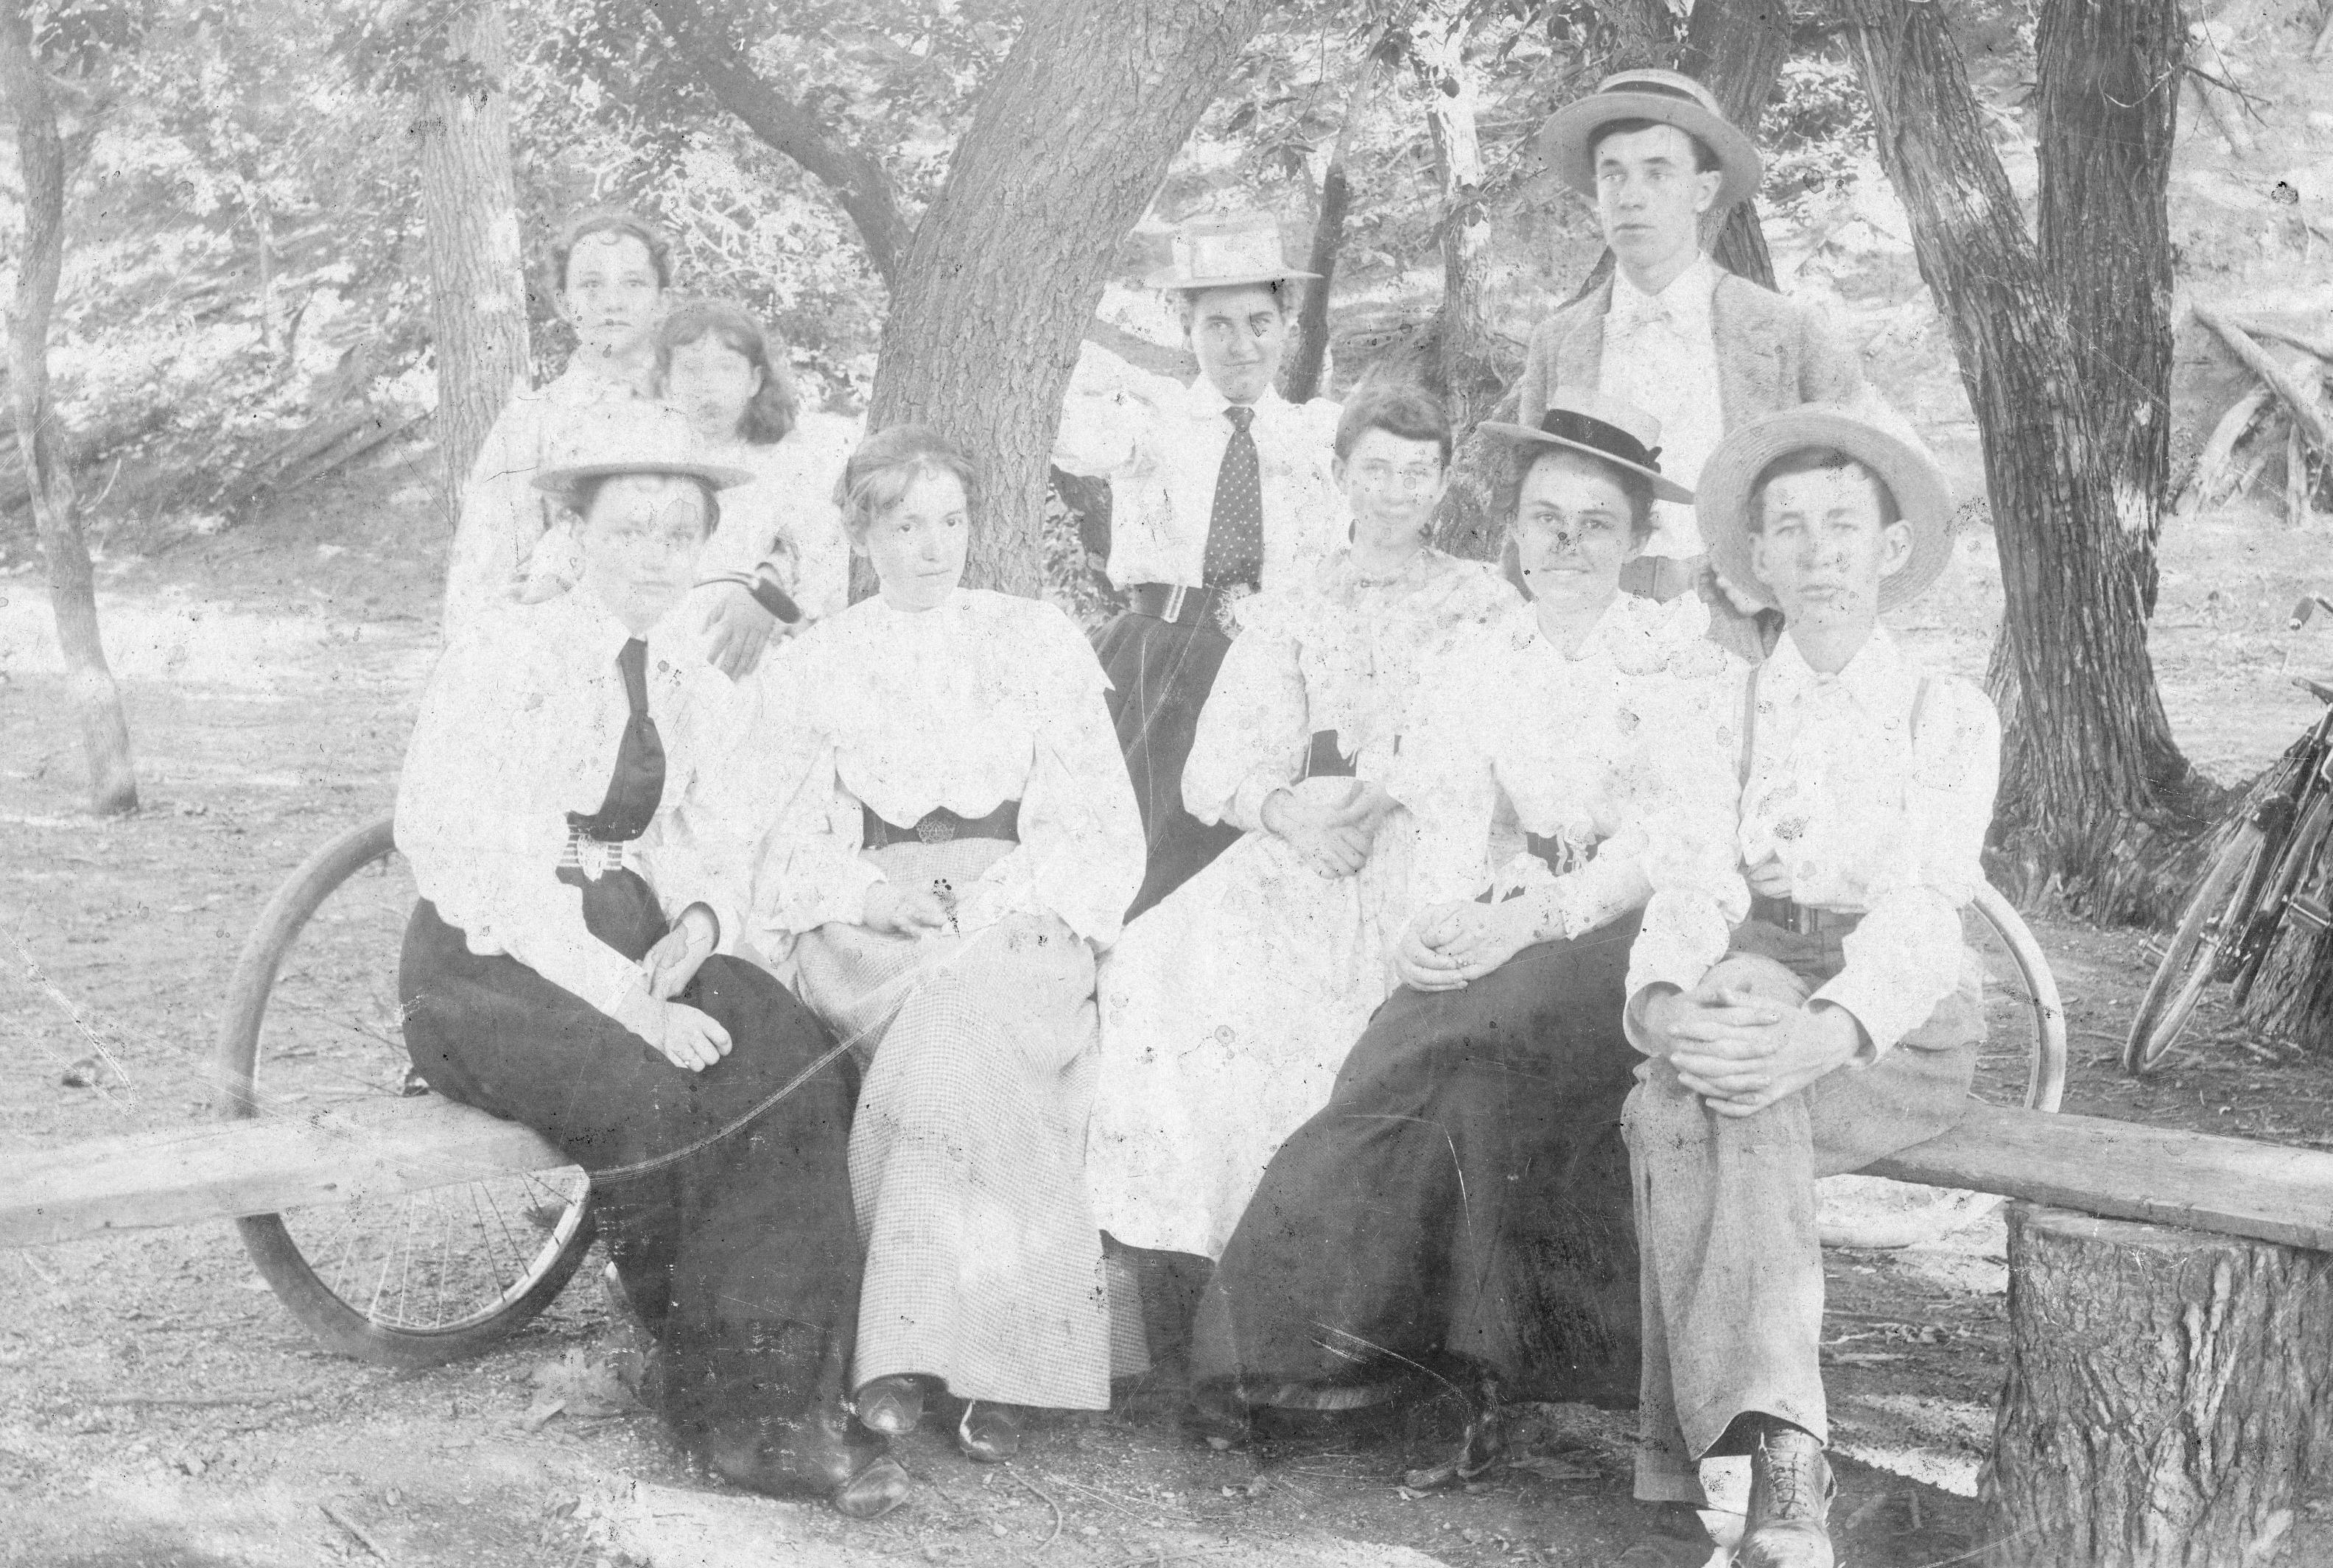 Willa Cather and friends sit with their bicycles, circa 1890